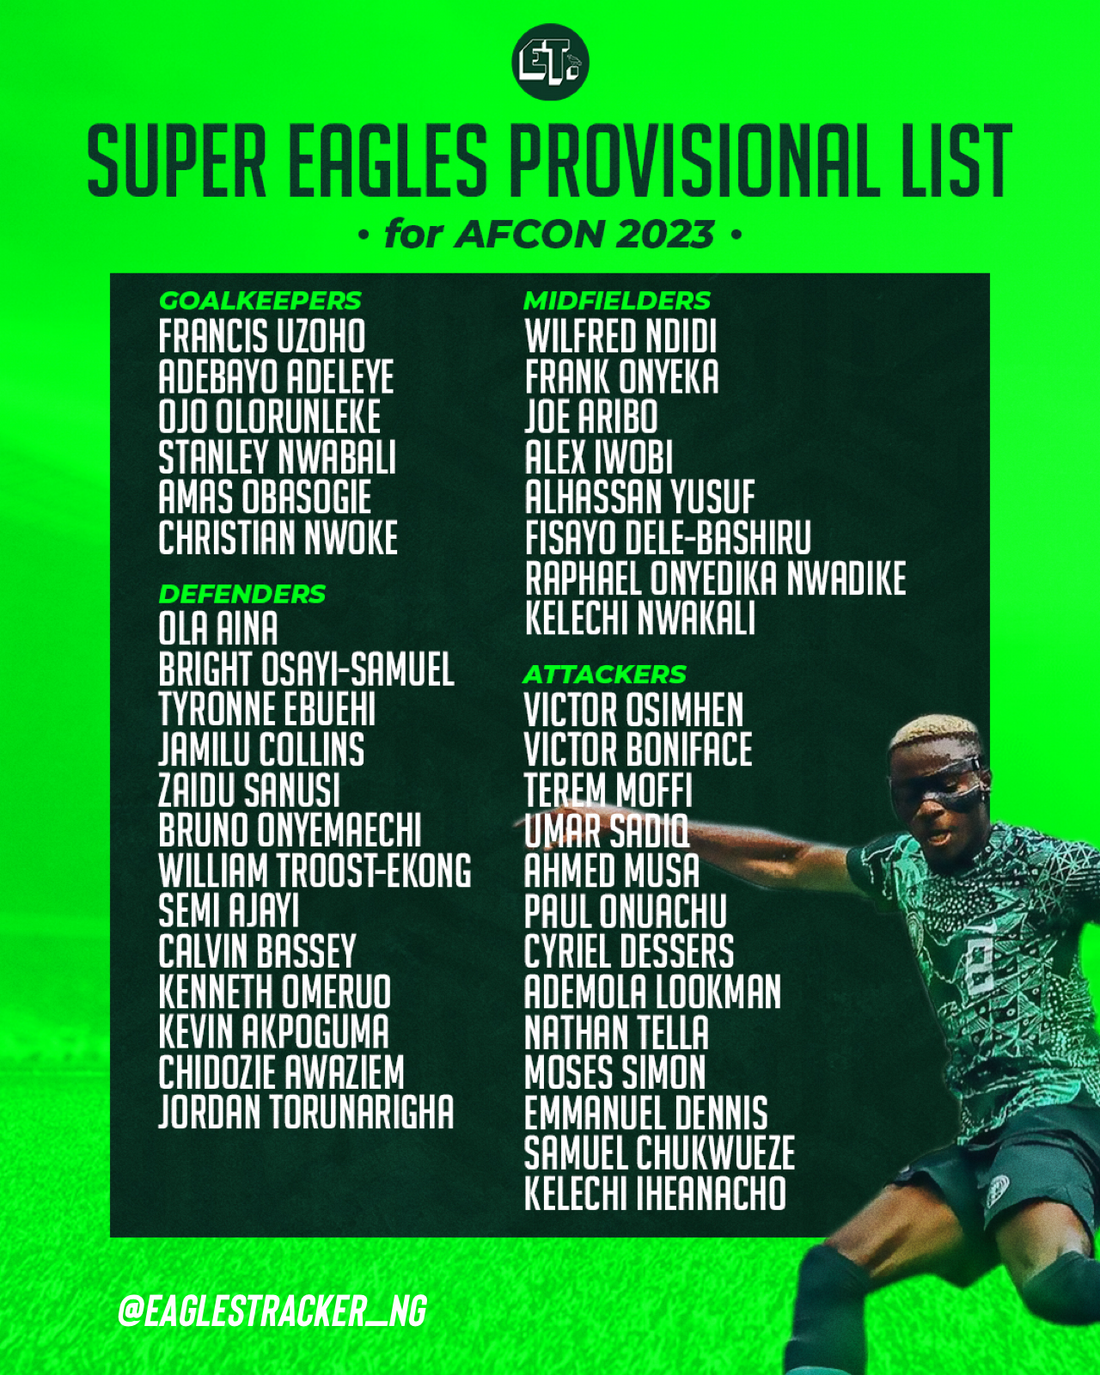 Osimhen in, Ejuke out of Super Eagles 40-man provisional squad for AFCON 2023